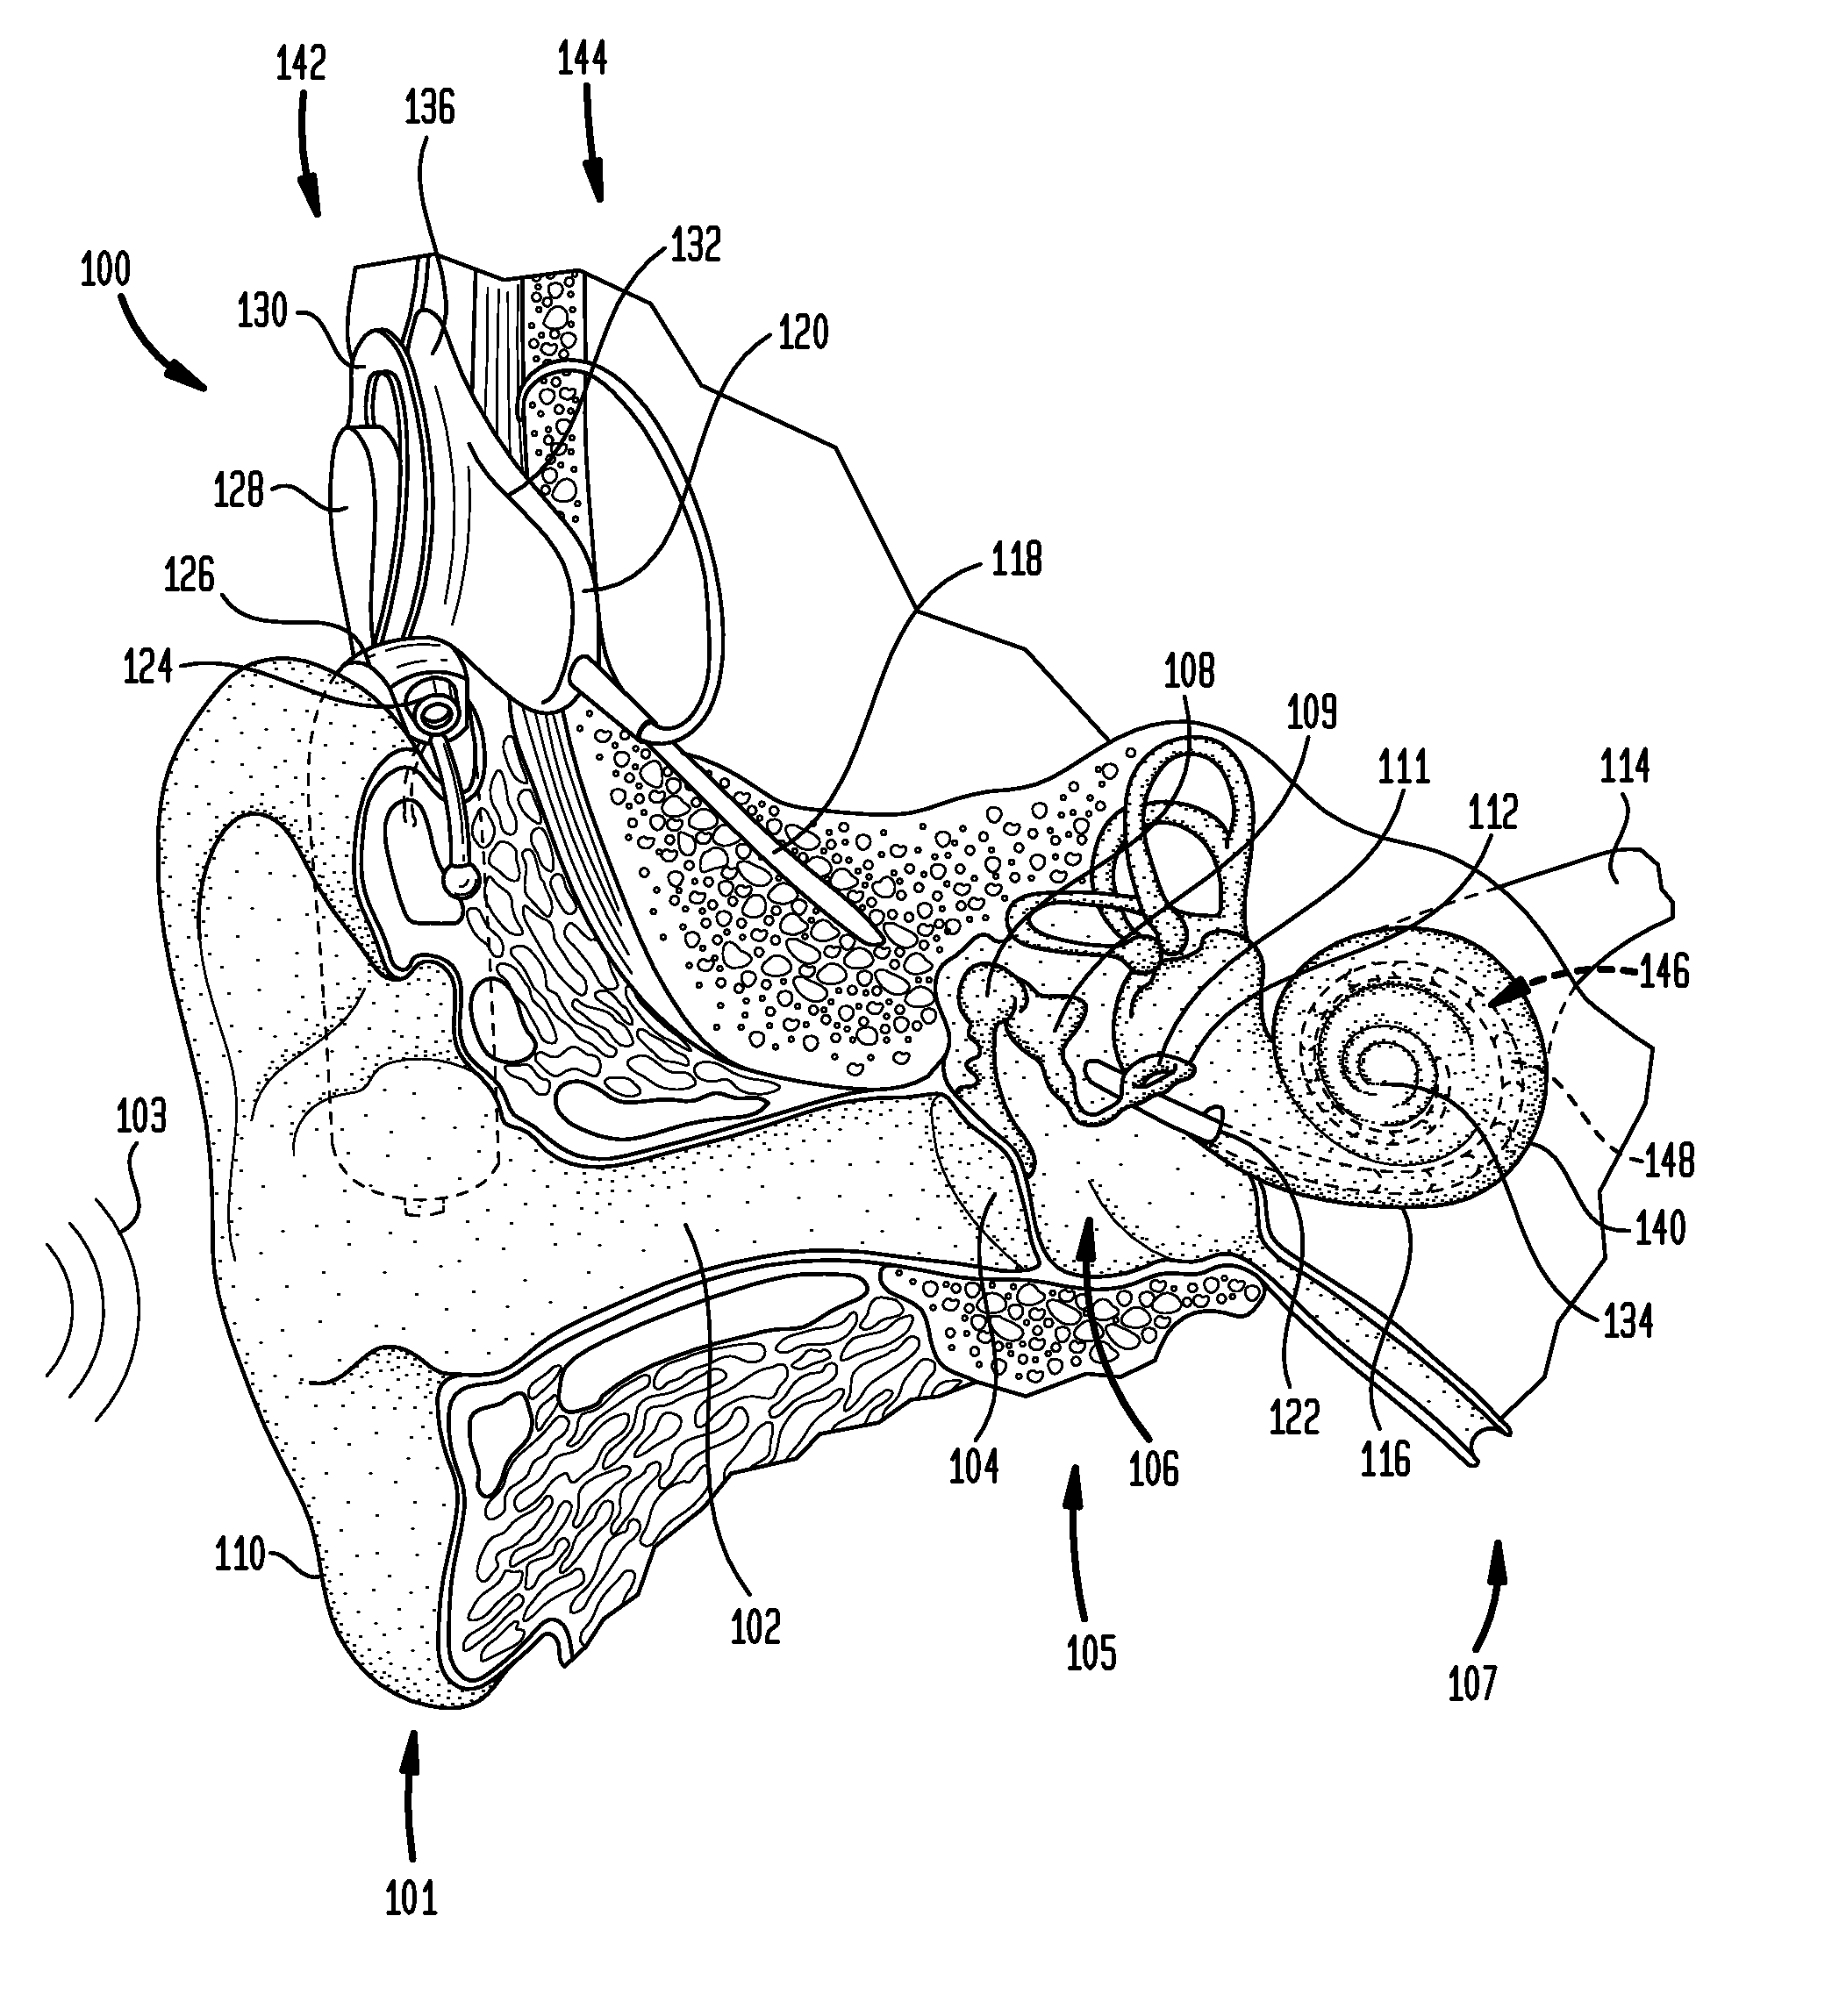 Electroneural interface for a medical implant